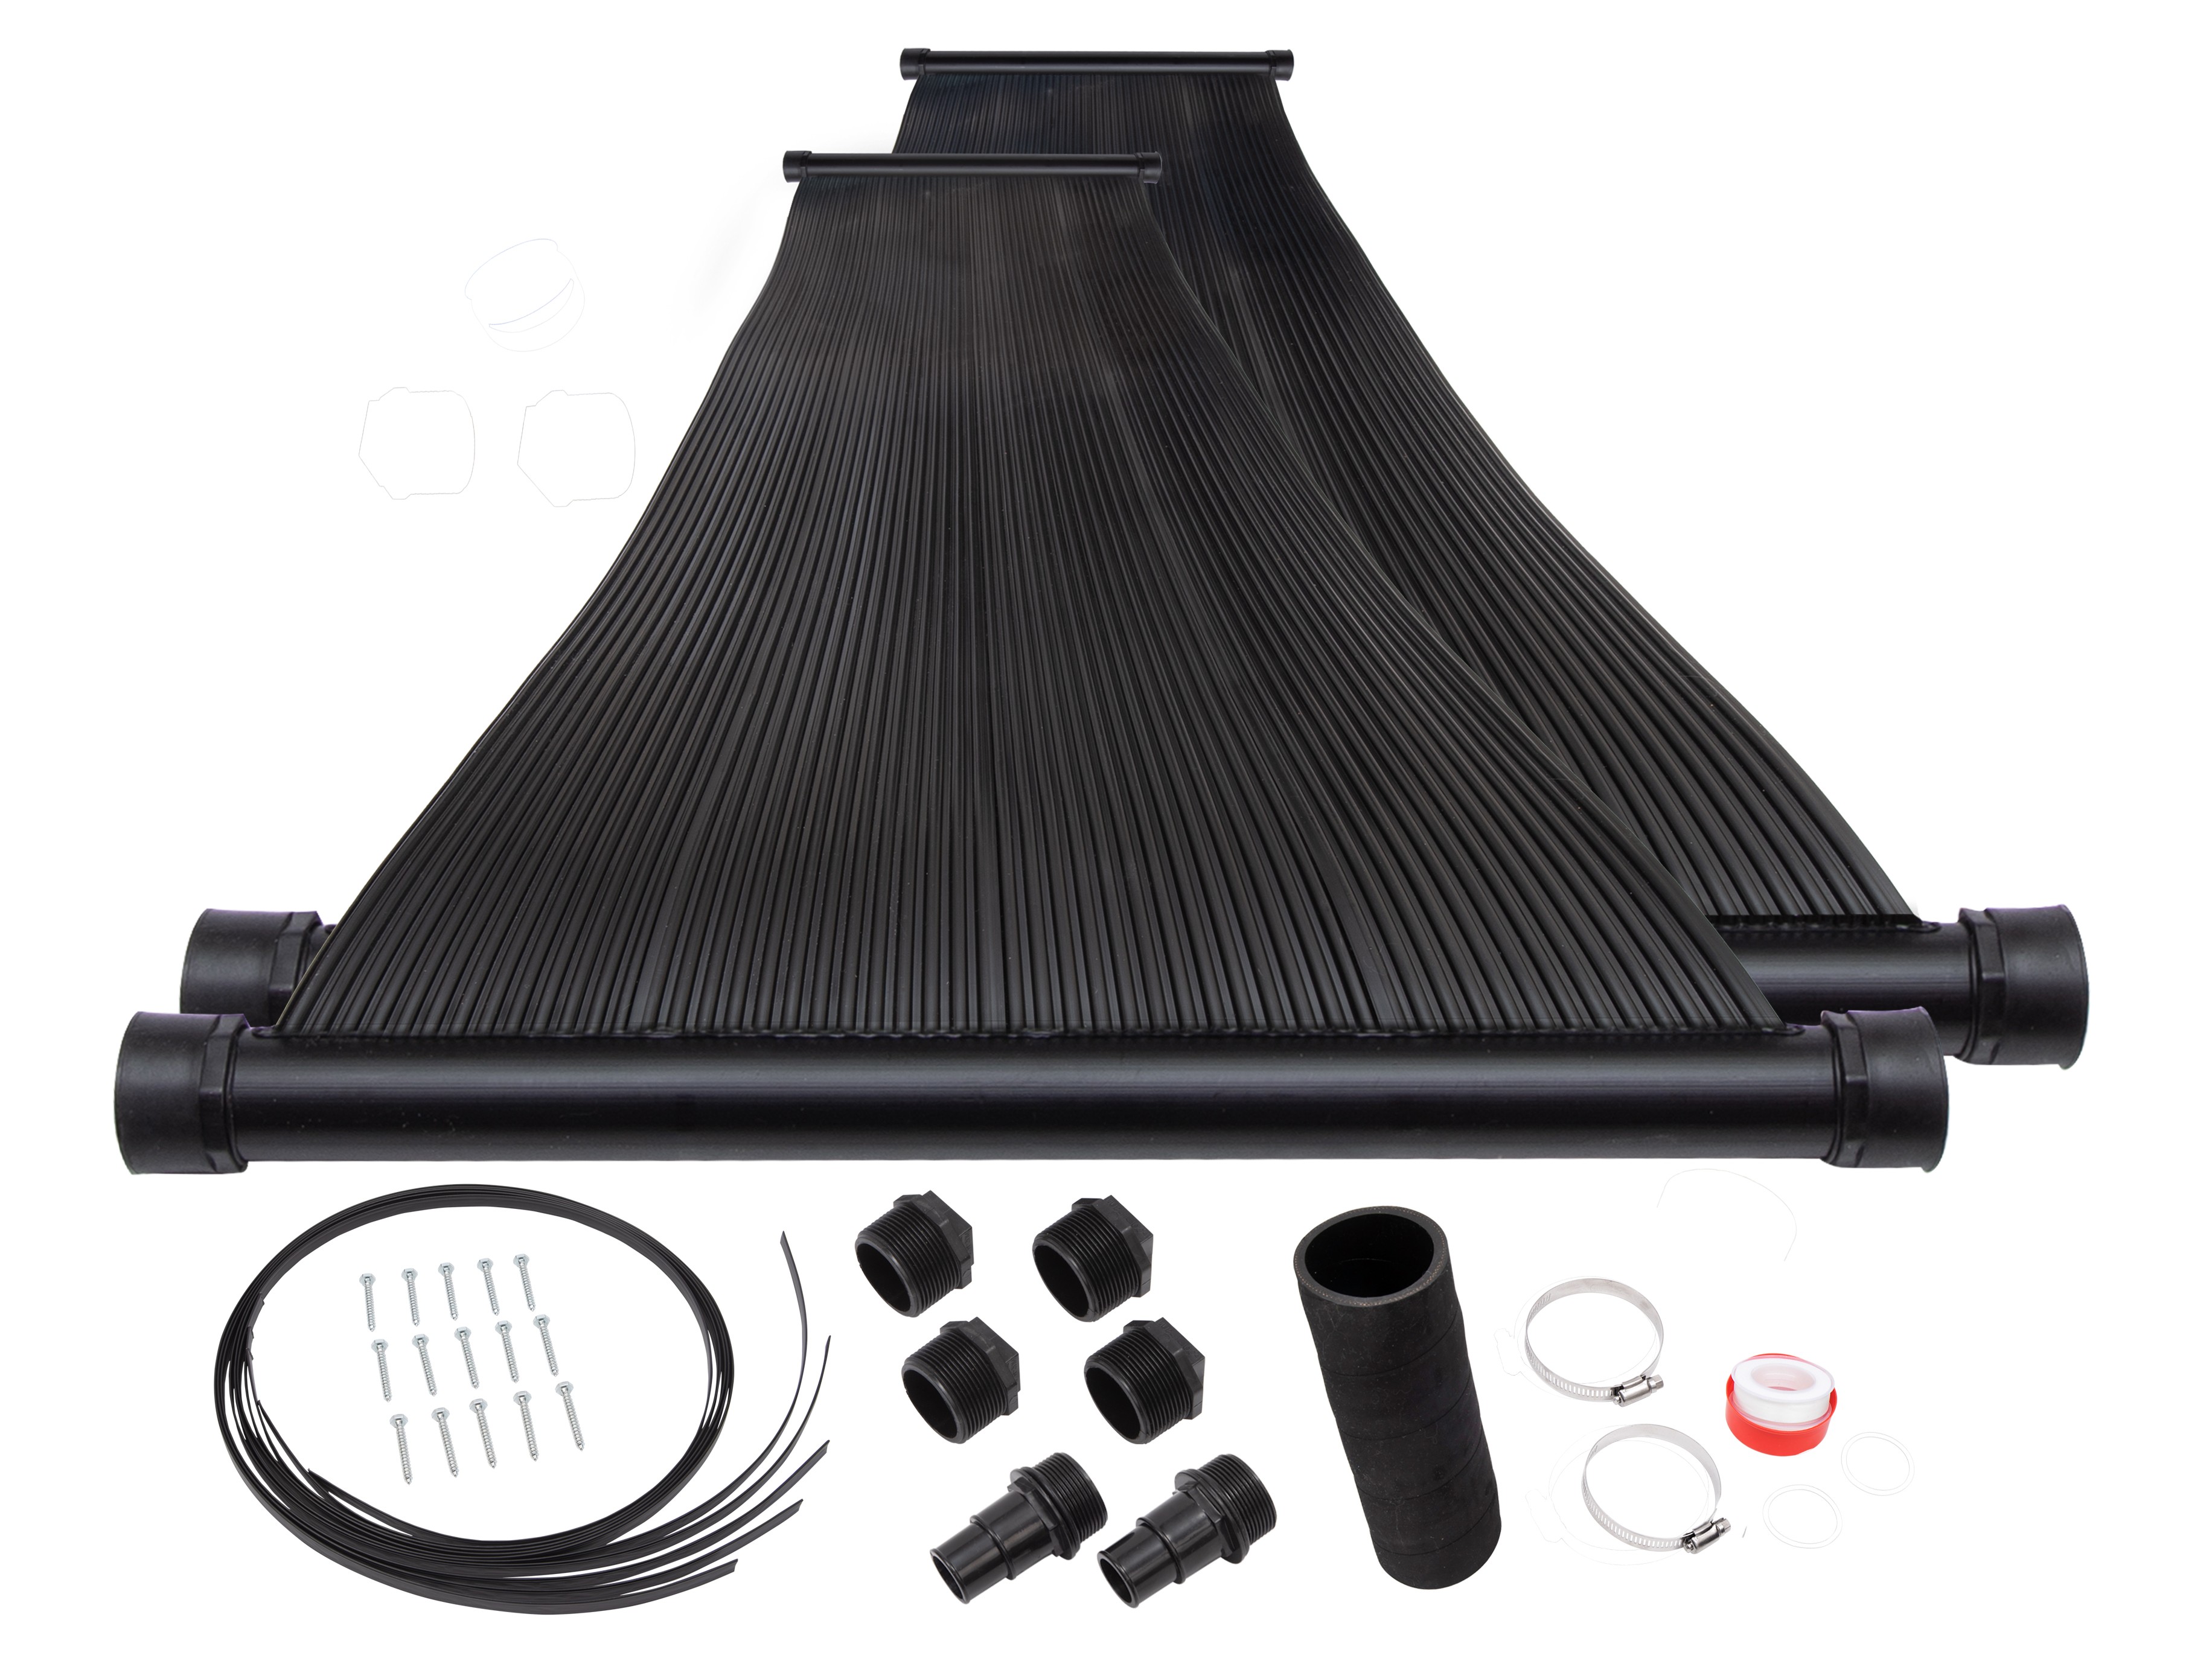 2-2'X12' SunQuest Solar Swimming Pool Heater with Roof/Rack Mounting Kit